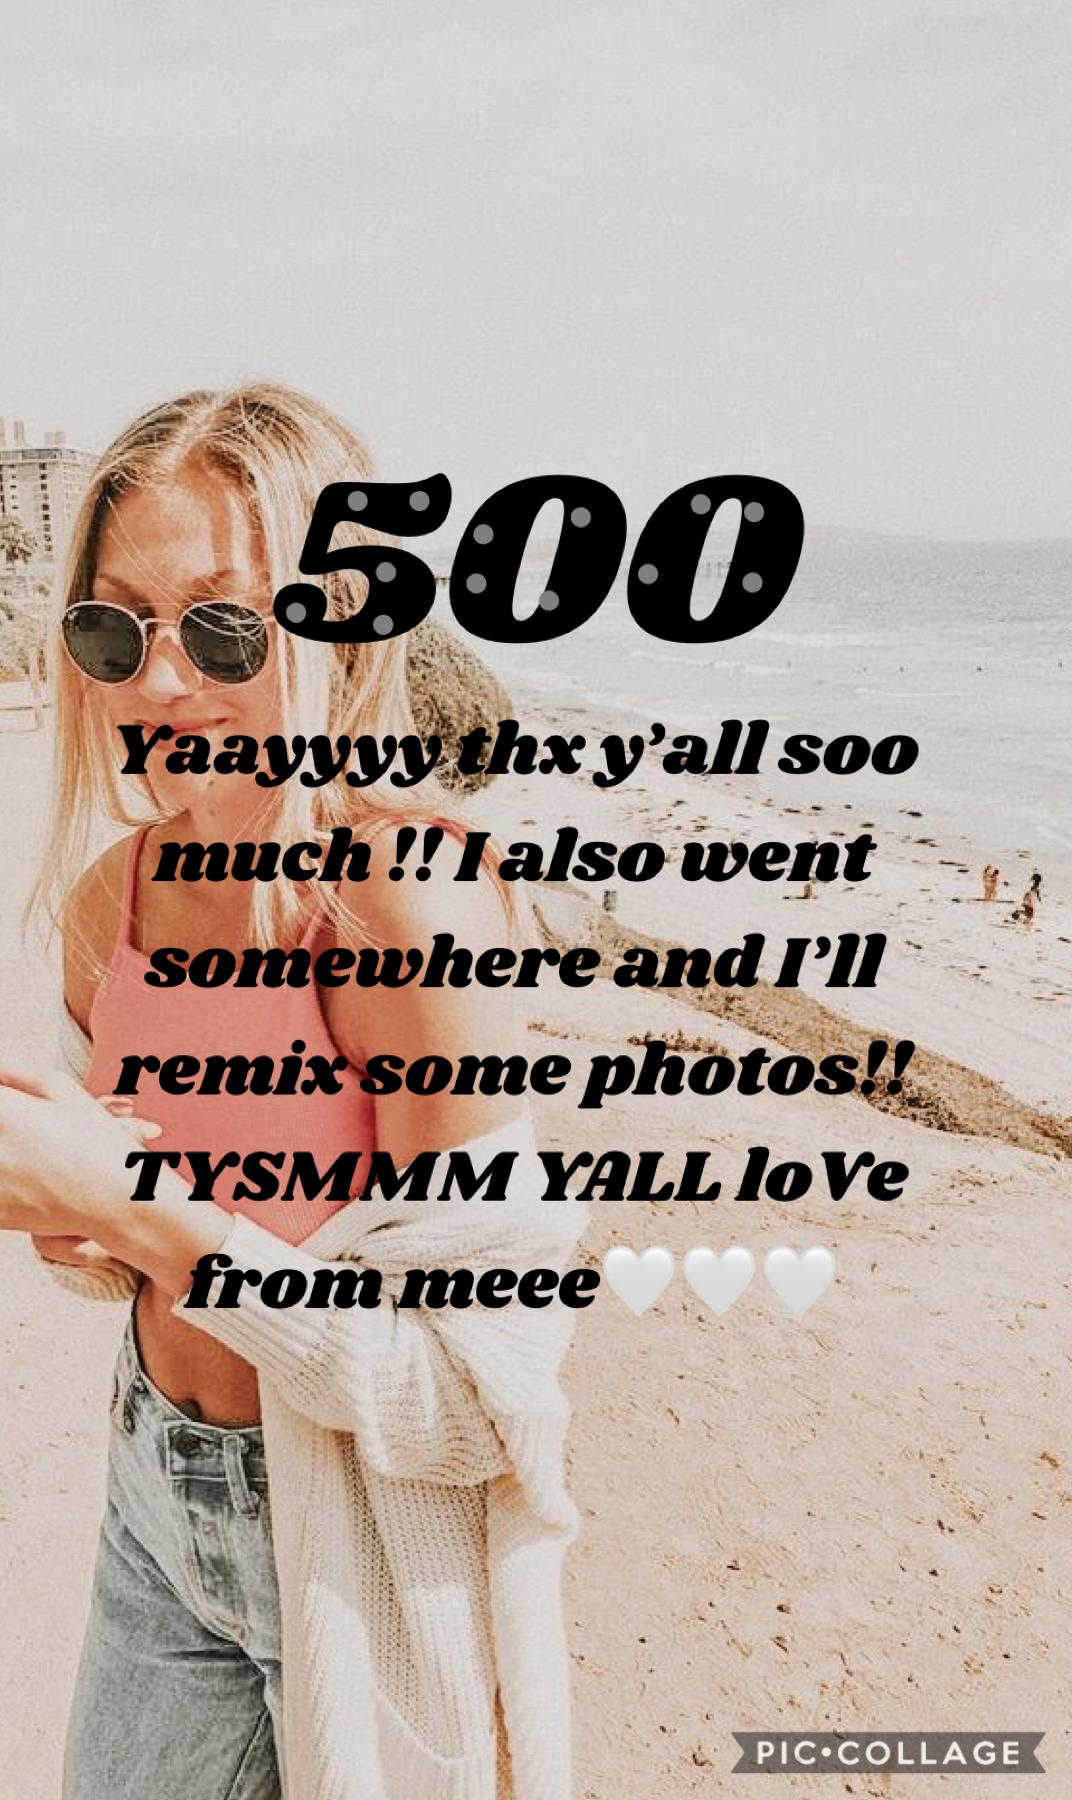 Tap the ✨

**Sniffle** I luv y’all 🥺🥺🥰🥰🥰